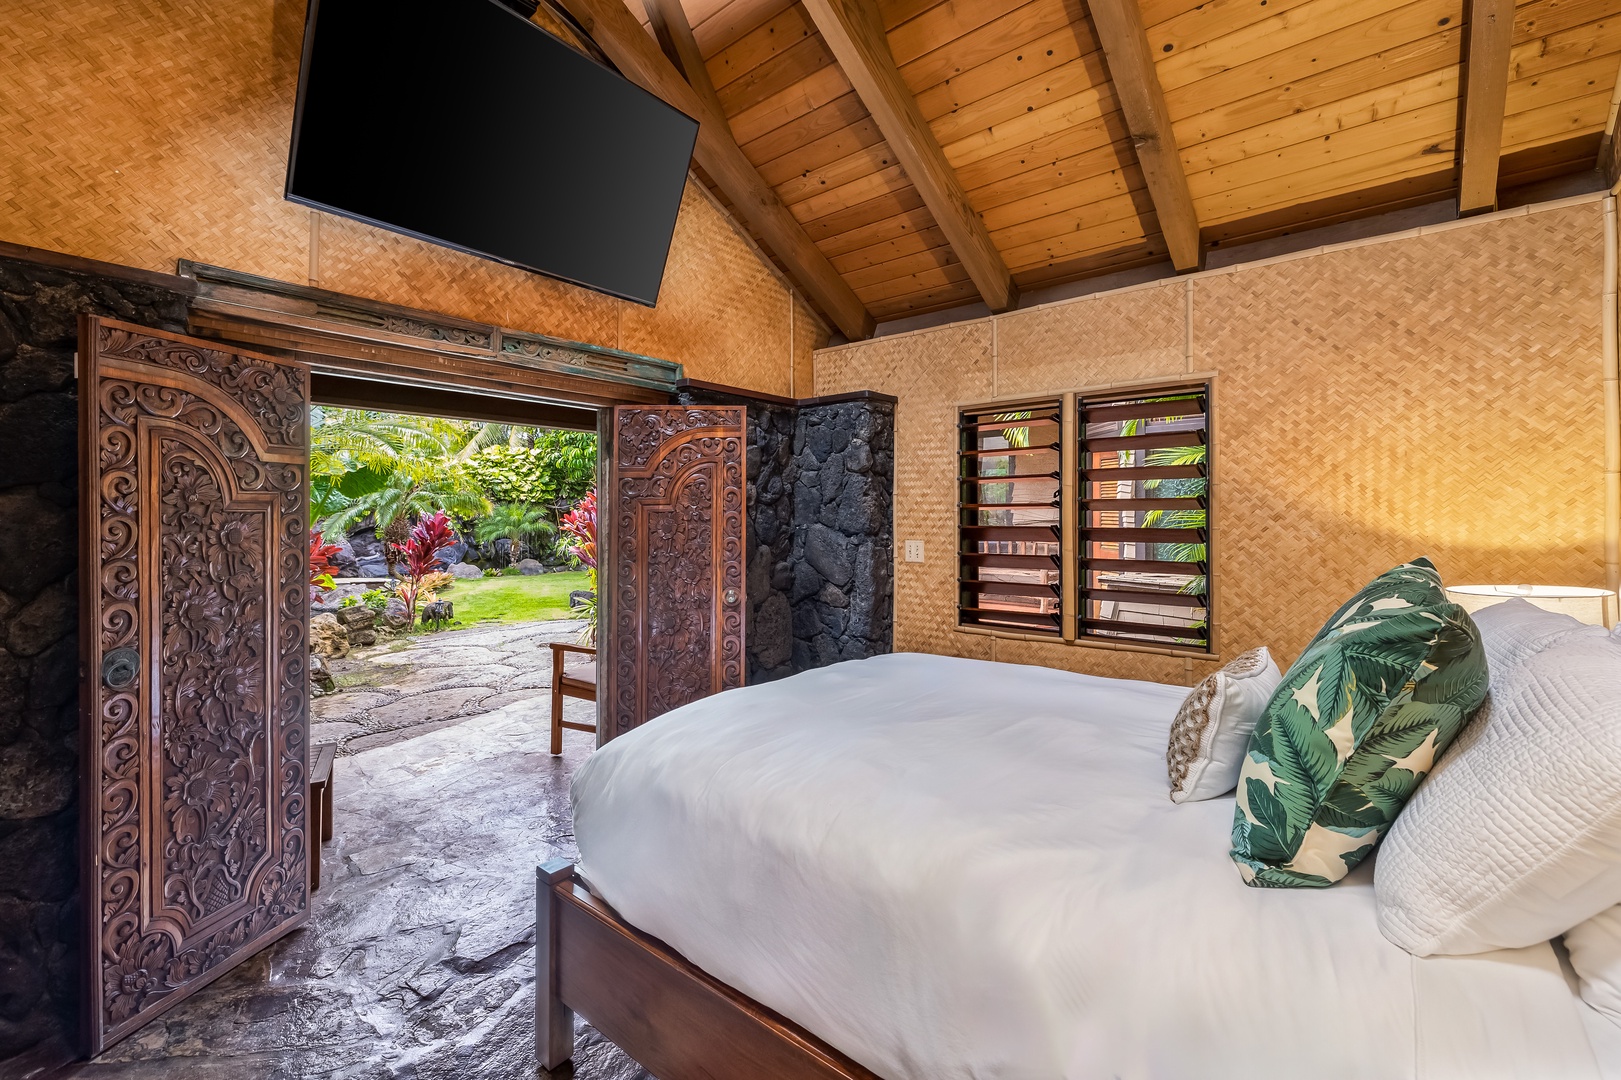 Waimanalo Vacation Rentals, Hawaii Hobbit House - Guest house bedroom opens up to the backyard and private lanai